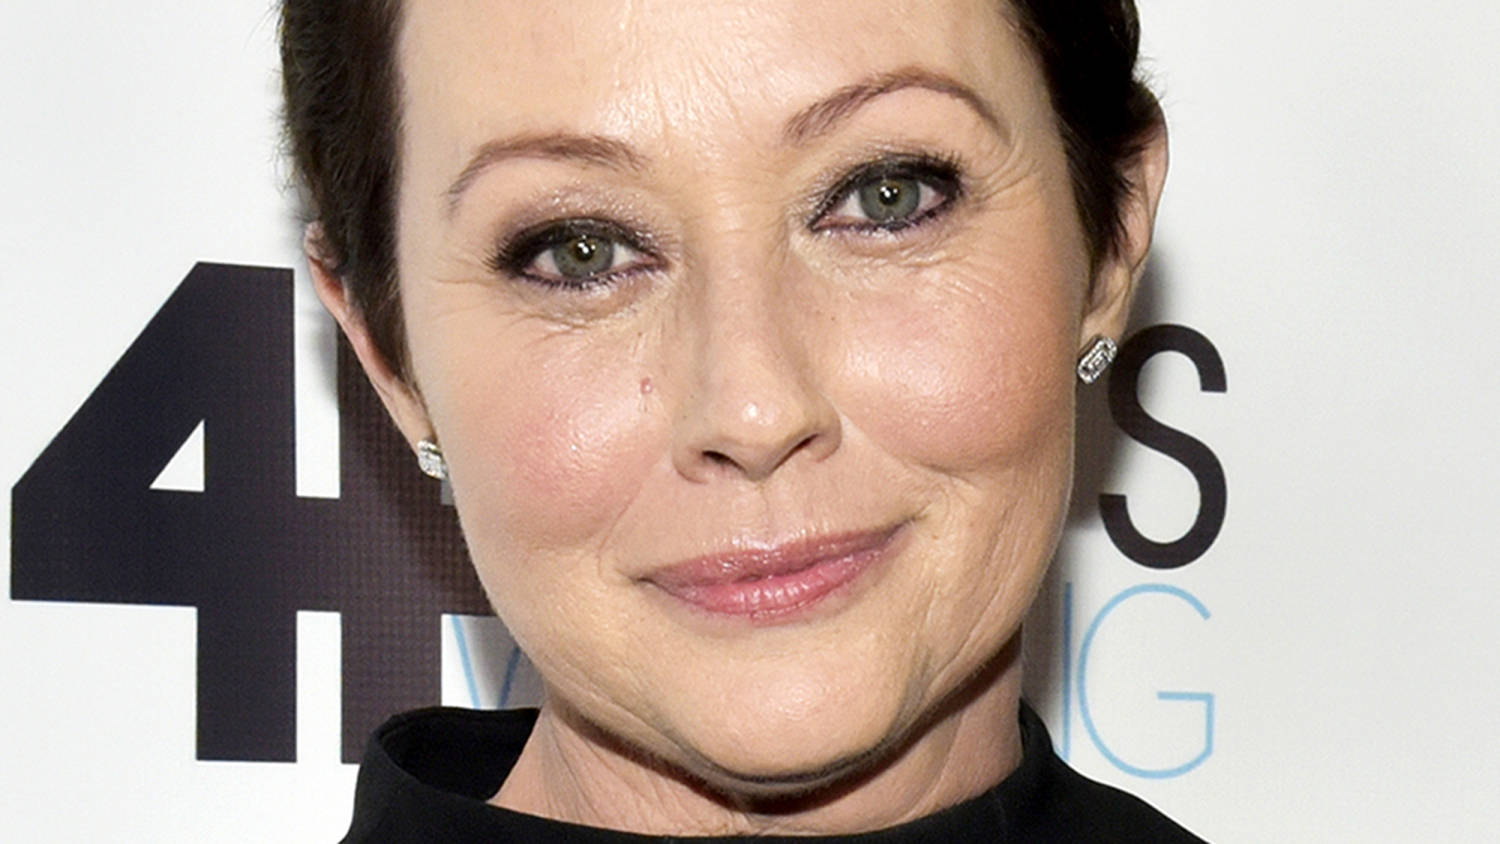 shannen-doherty-today-170306-tease